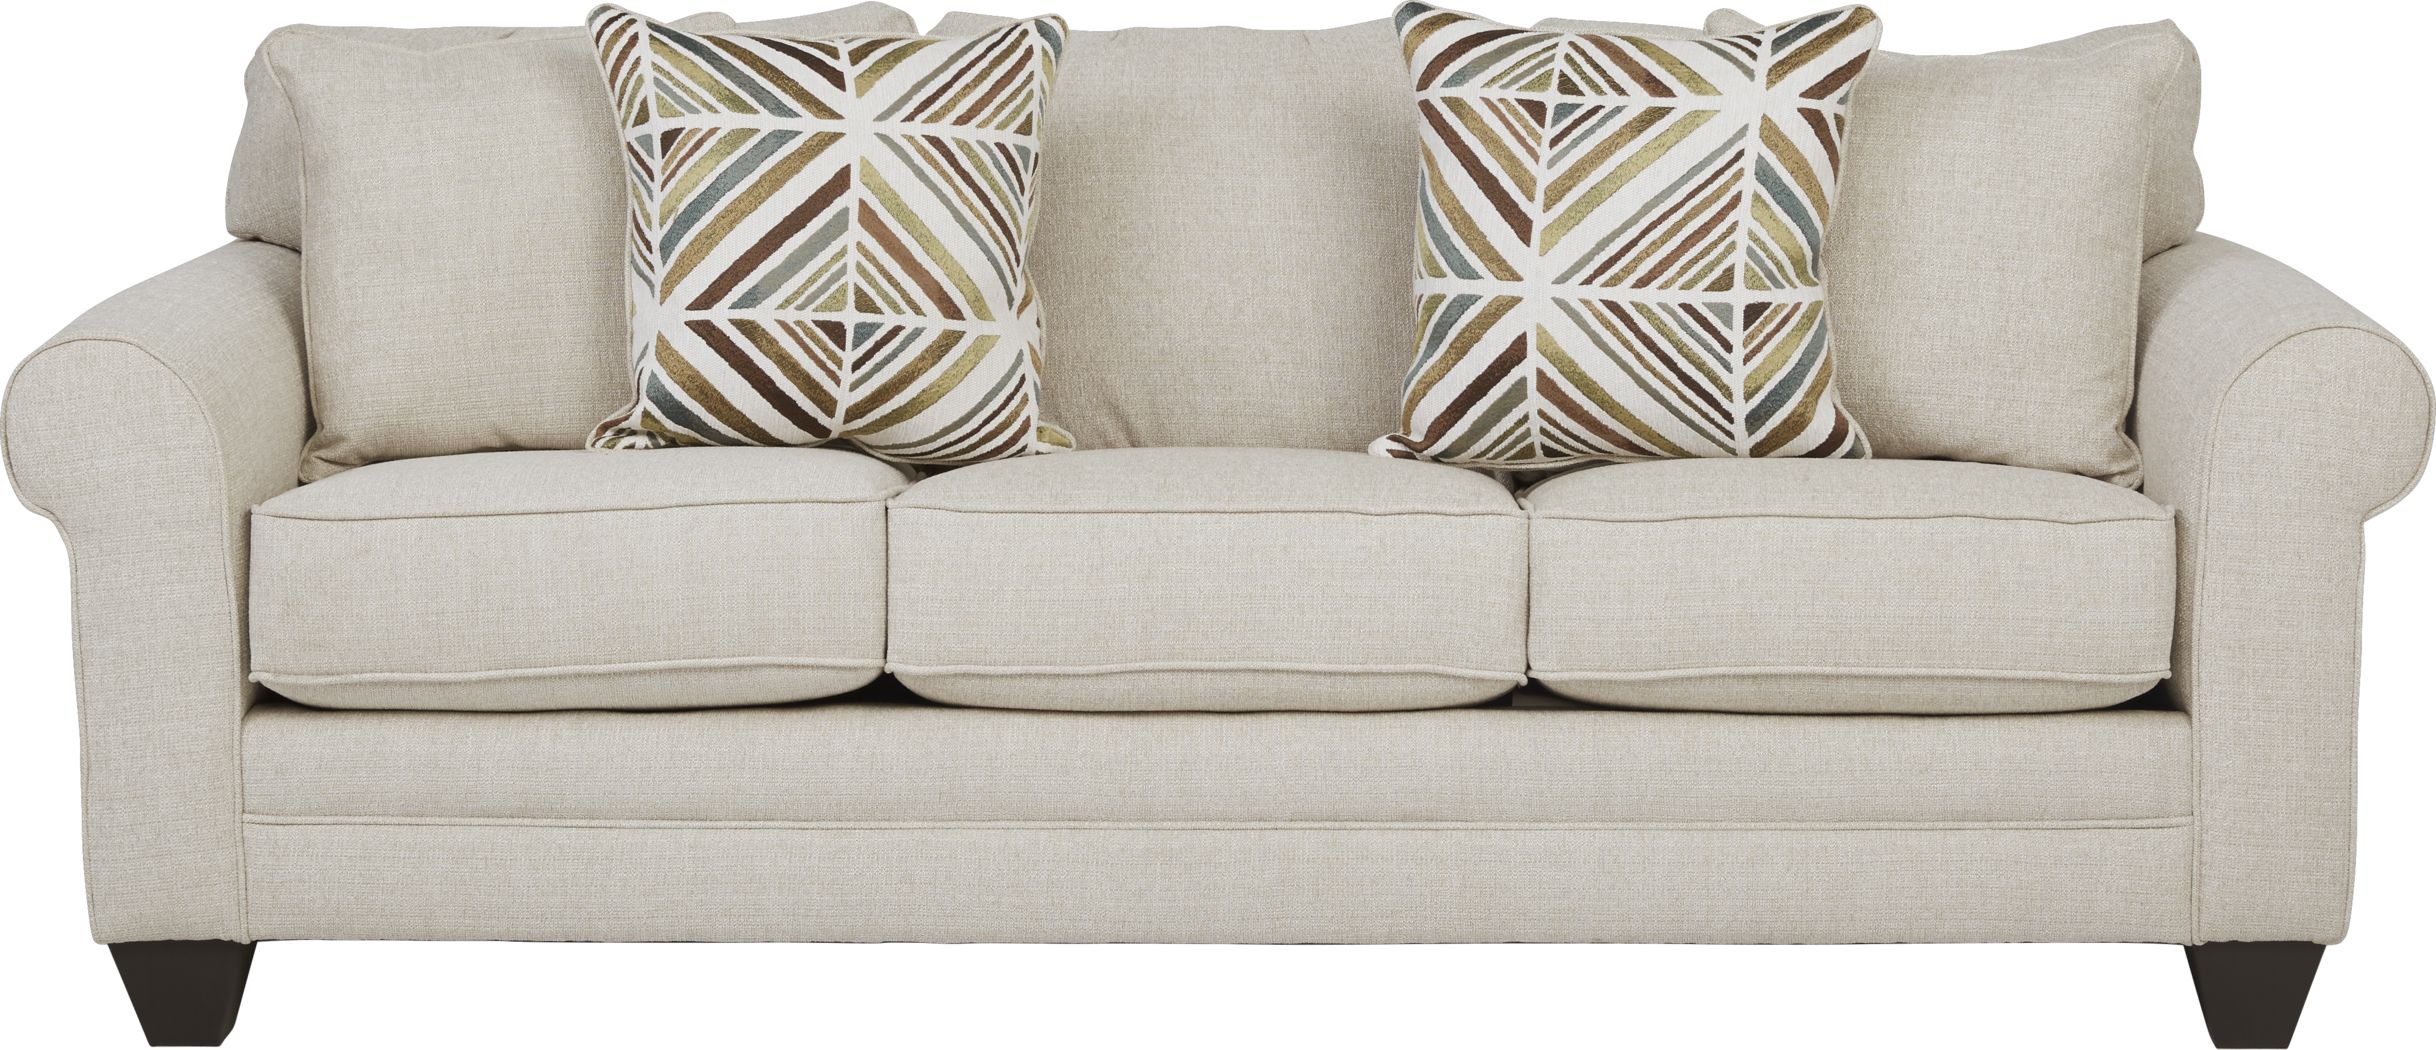 Sofas Affordable Couches For, Sofas Under 400 Dollars